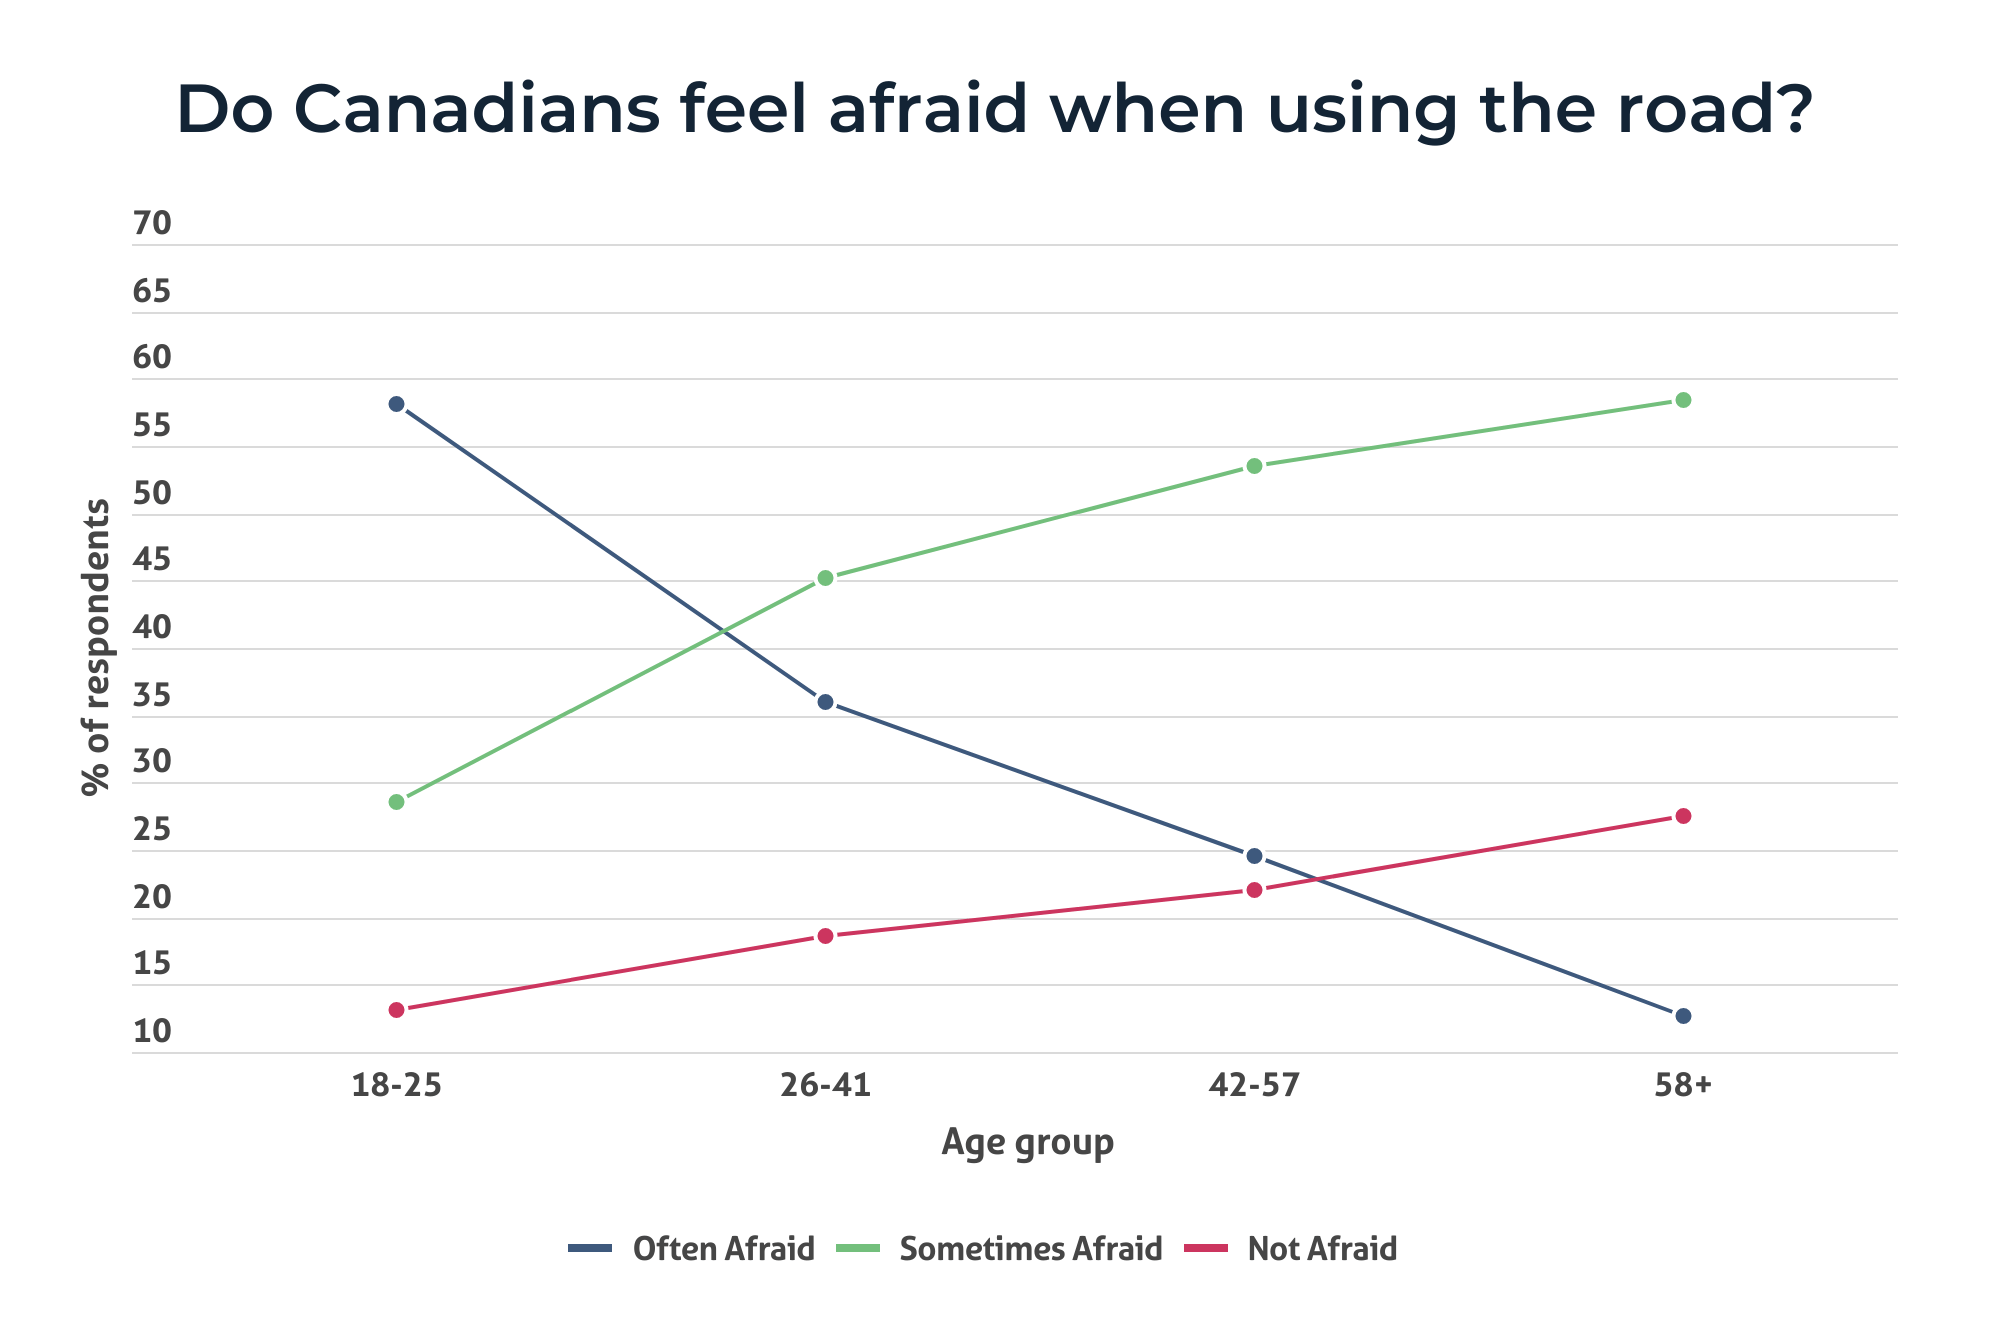 Line chart showing how often Canadian road users feel afraid when using the road, by age group